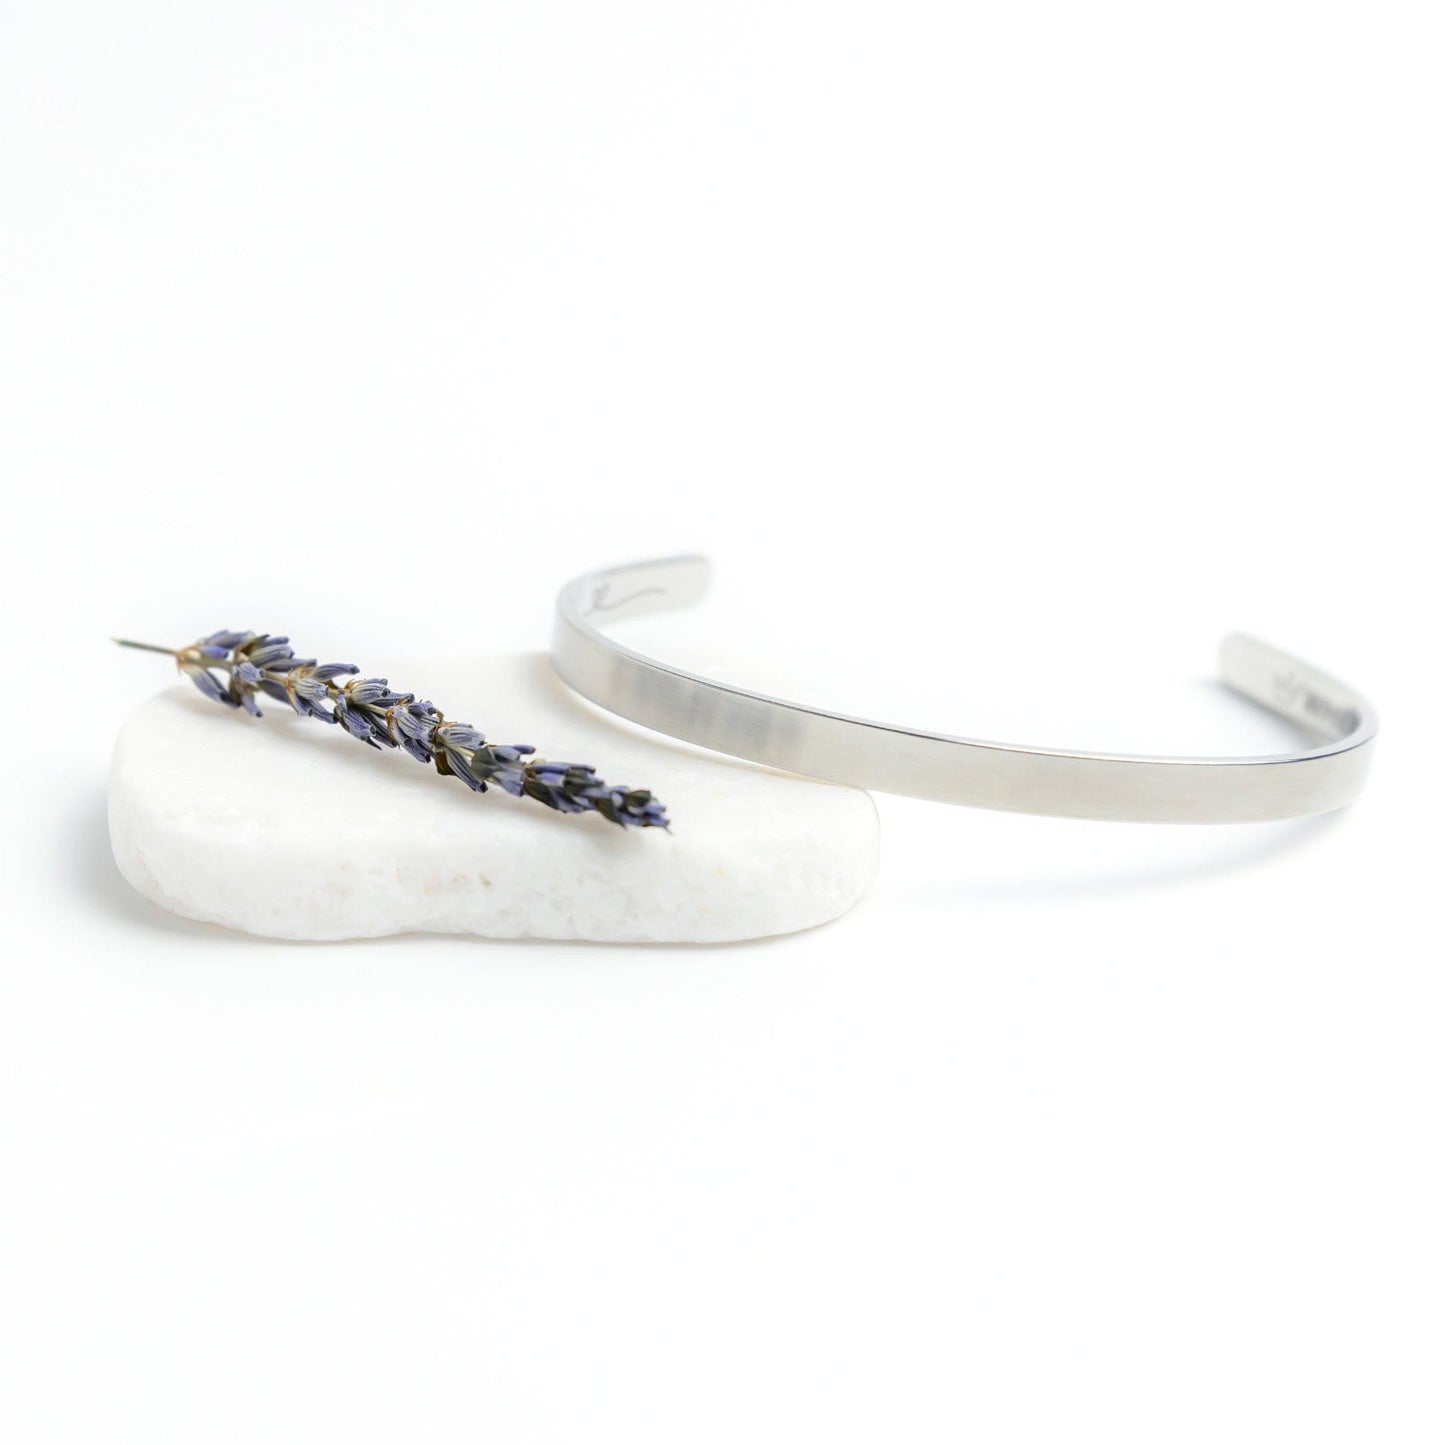 Jewelry "Remember Whose Daughter You Are" - Cuff Bracelet